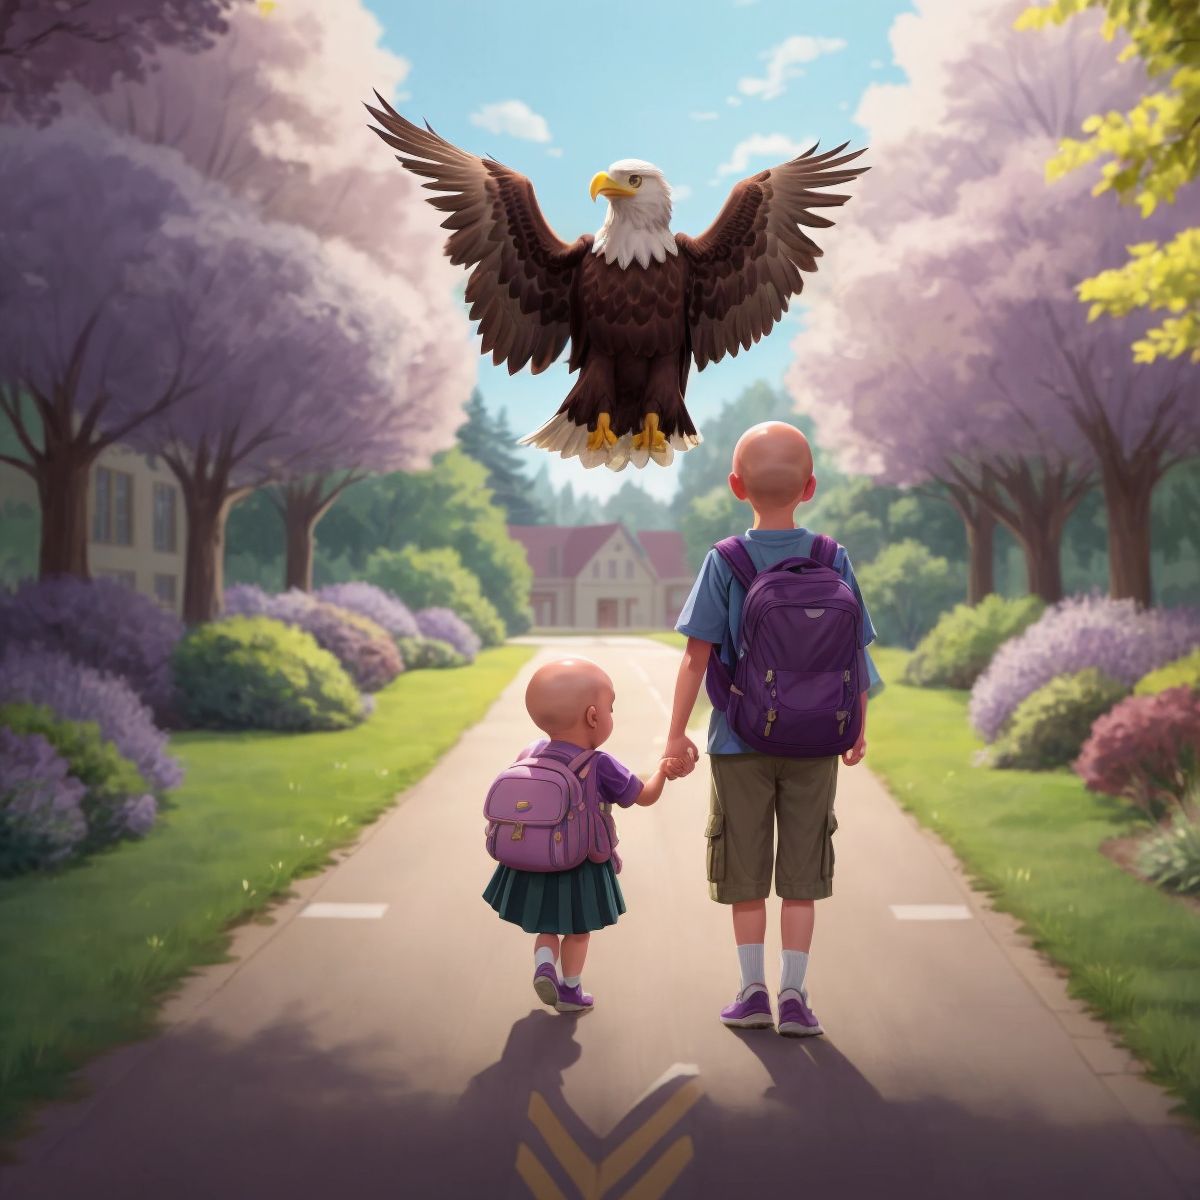 Little Eagle and Little Lion walking home on a path lined with trees, with the school in the background, chatting happily.